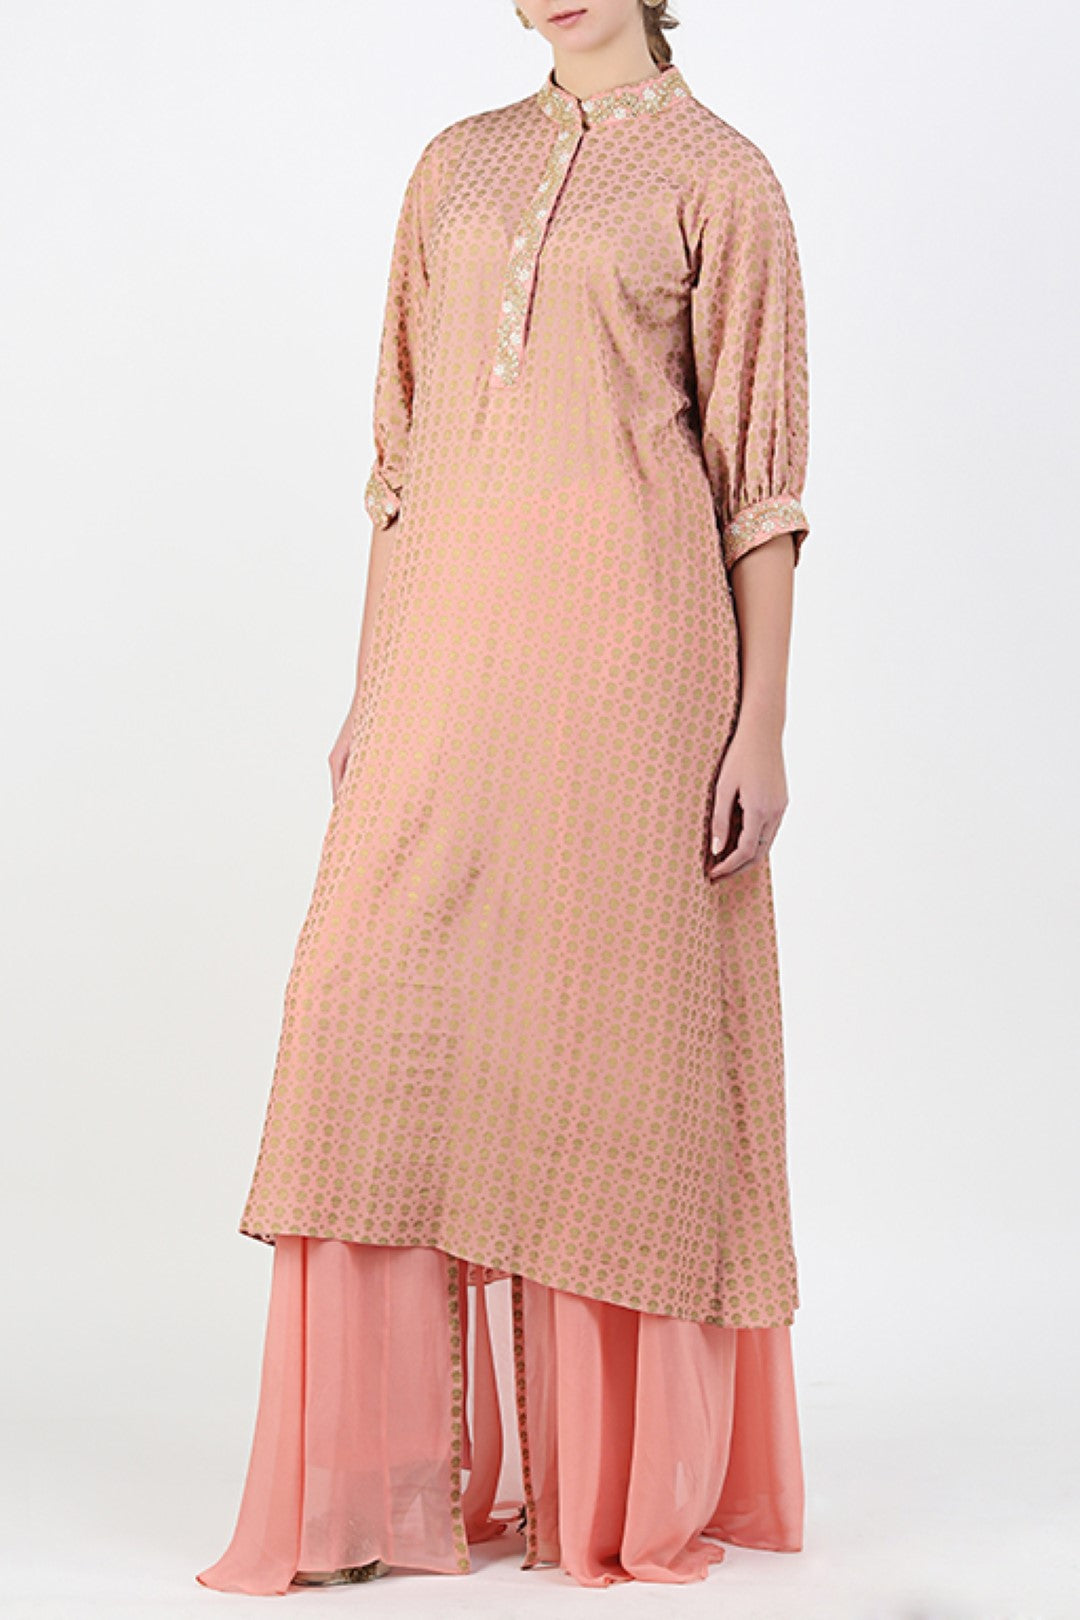 DUSKY SALMON PRINTED EMBROIDERED KURTA WITH FRONT OPEN SHARARA